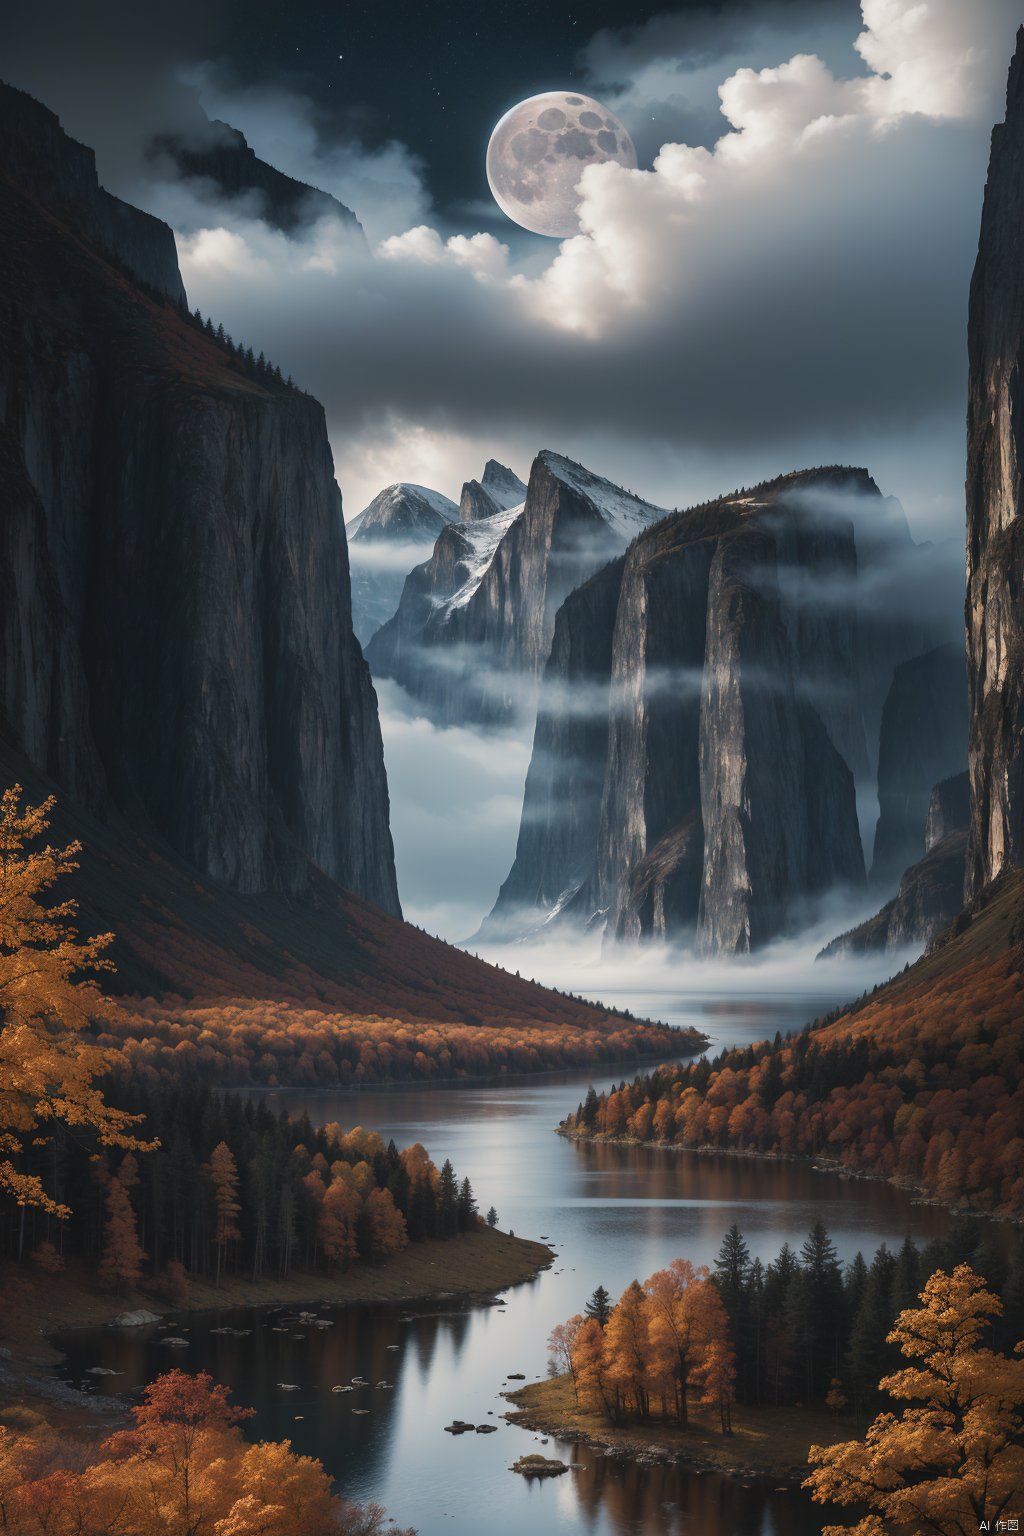  photo RAW,(autumn,mountains and a storm lake with a moon in the sky, old wooden slab home, 4k highly detailed digital art, 4 k hd wallpaper very detailed, impressive fantasy landscape, sci-fi fantasy desktop wallpaper, 4k wallpaper, 4k detailed hdr photography, sci-fi fantasy wallpaper, epic dreamlike fantasy landscape, 4k hd matte, 8k,Realistic, realism, hd, 35mm photograph, 8k), masterpiece, award winning photography, natural light, perfect composition, high detail, hyper realistic, (composition centering, conceptual photography), realistic, detailed, balanced, by Trey Ratcliff, Klaus Herrmann, Serge Ramelli, Jimmy McIntyre, Elia Locardi